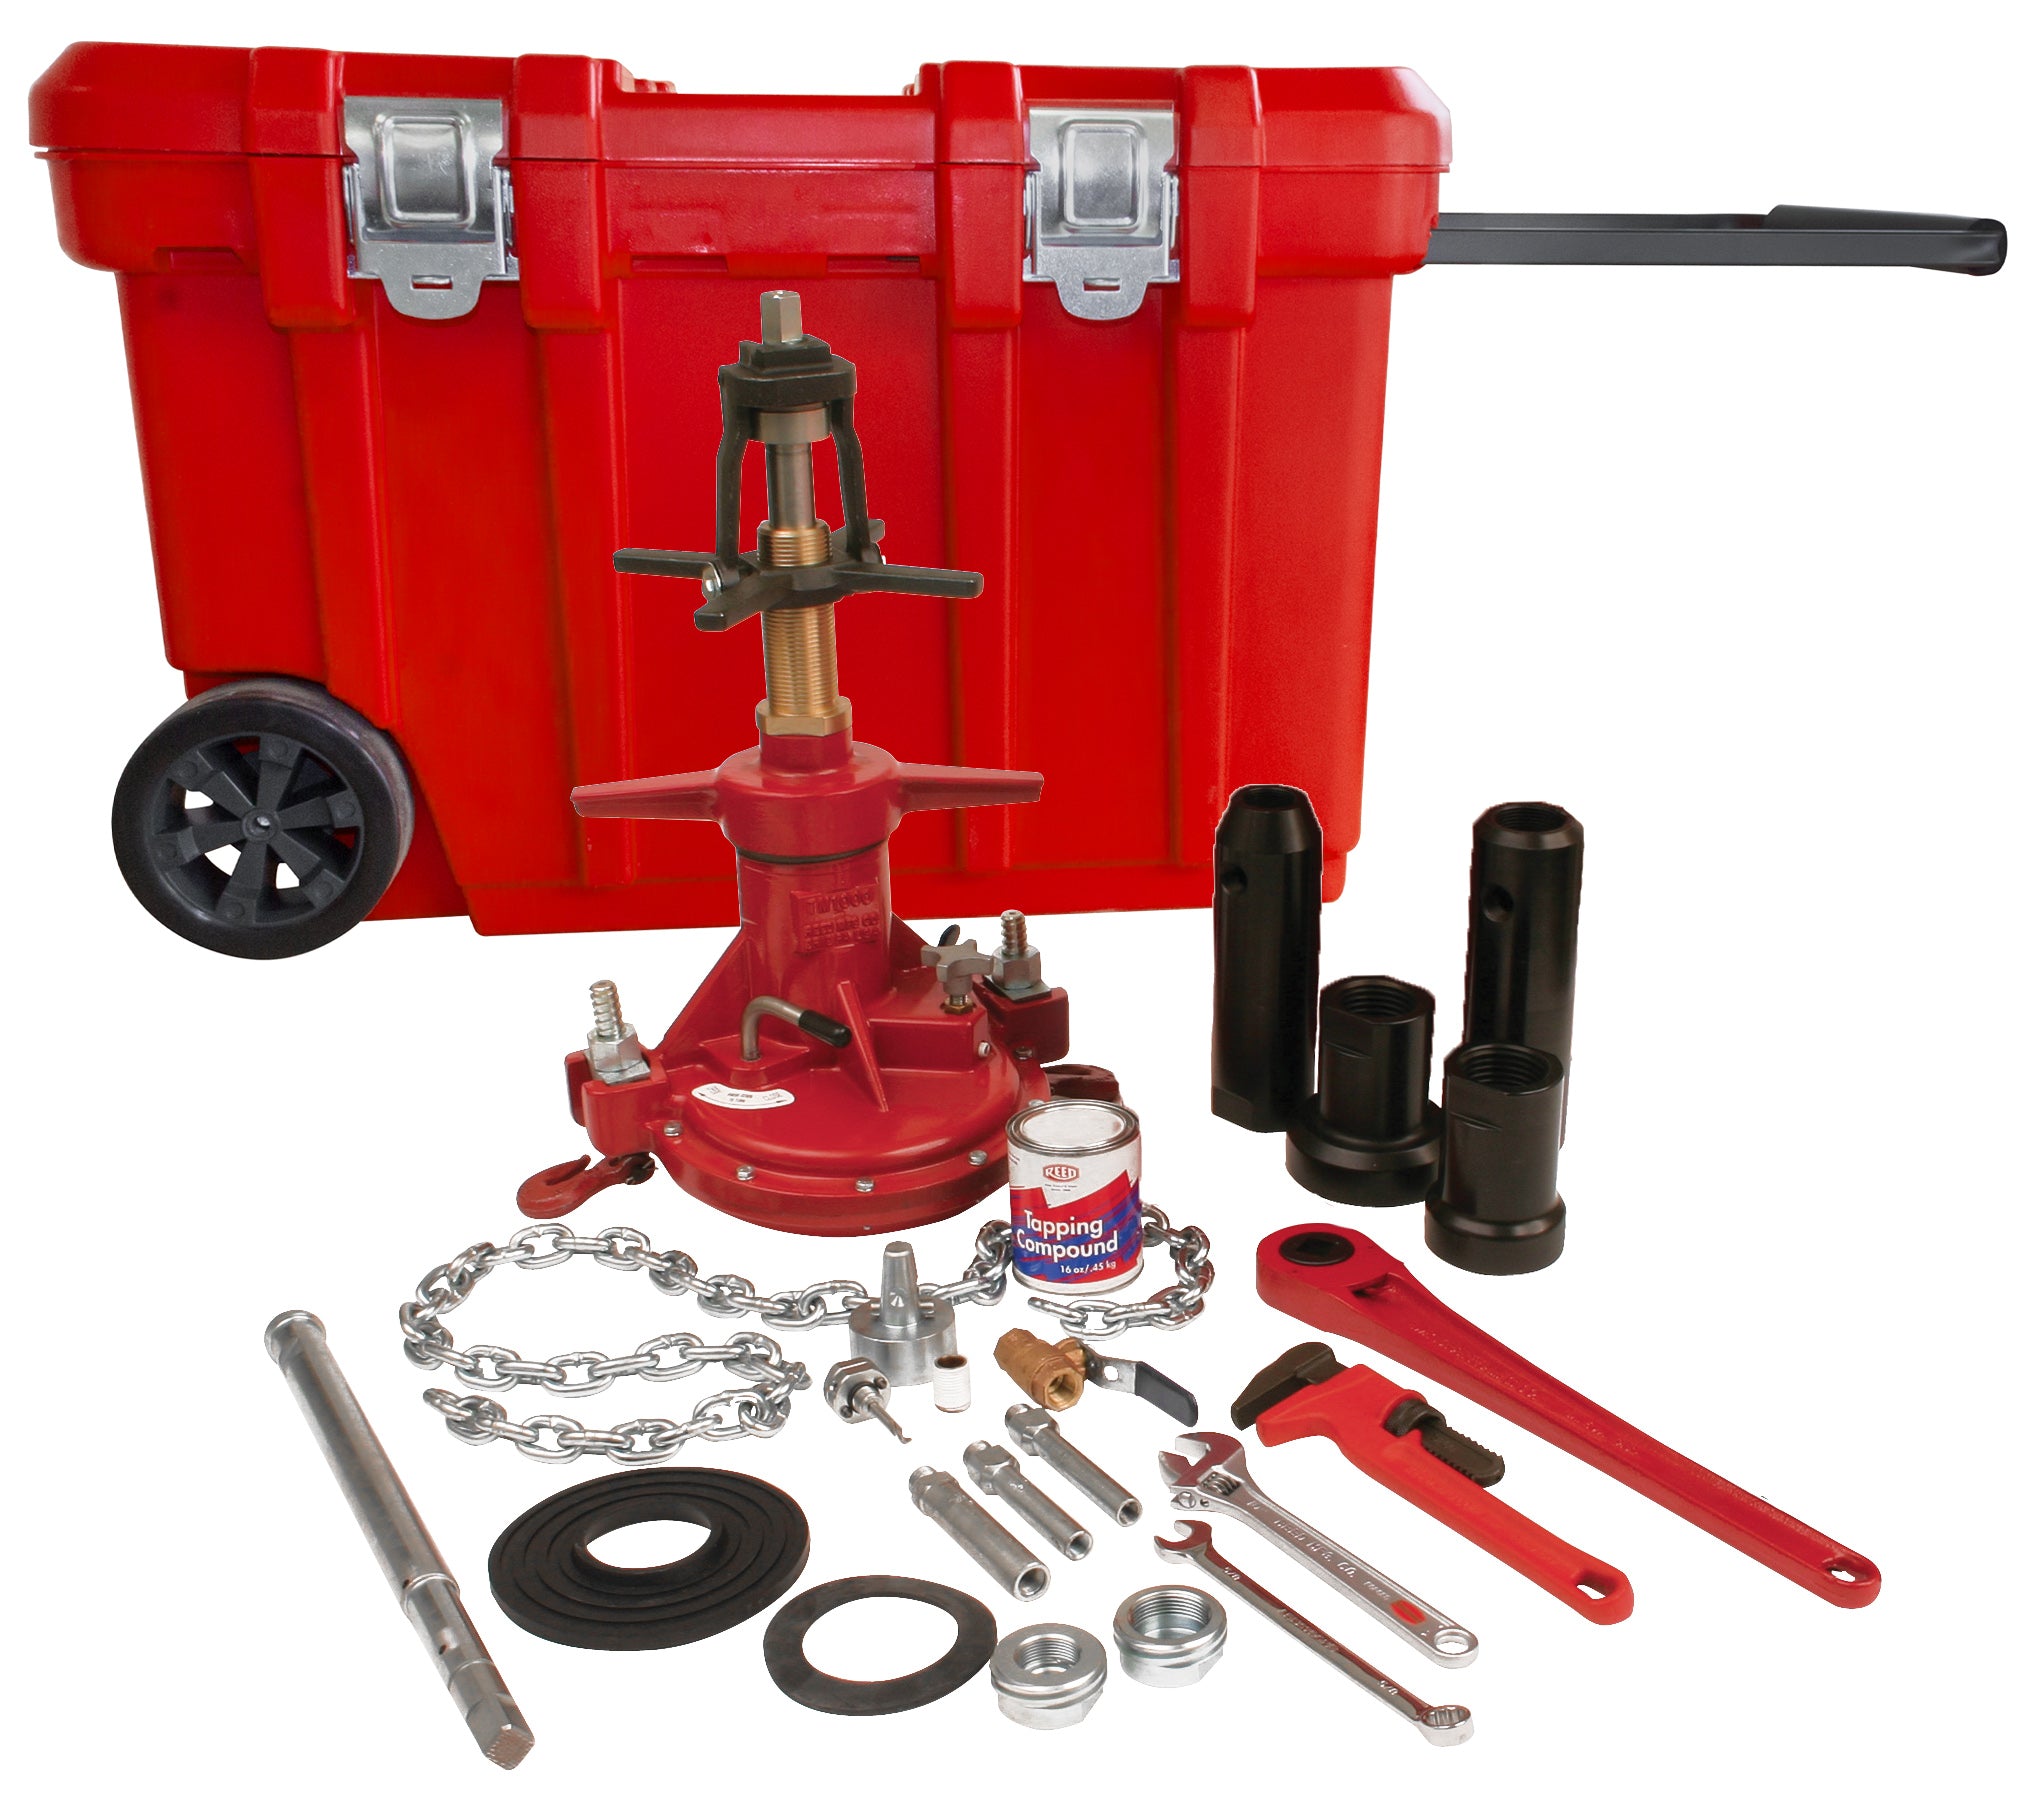 Reed CDTM2100 Combination Drilling/Tapping Machine (3/4" - 1" Tap; 3/4" - 2" Drill)